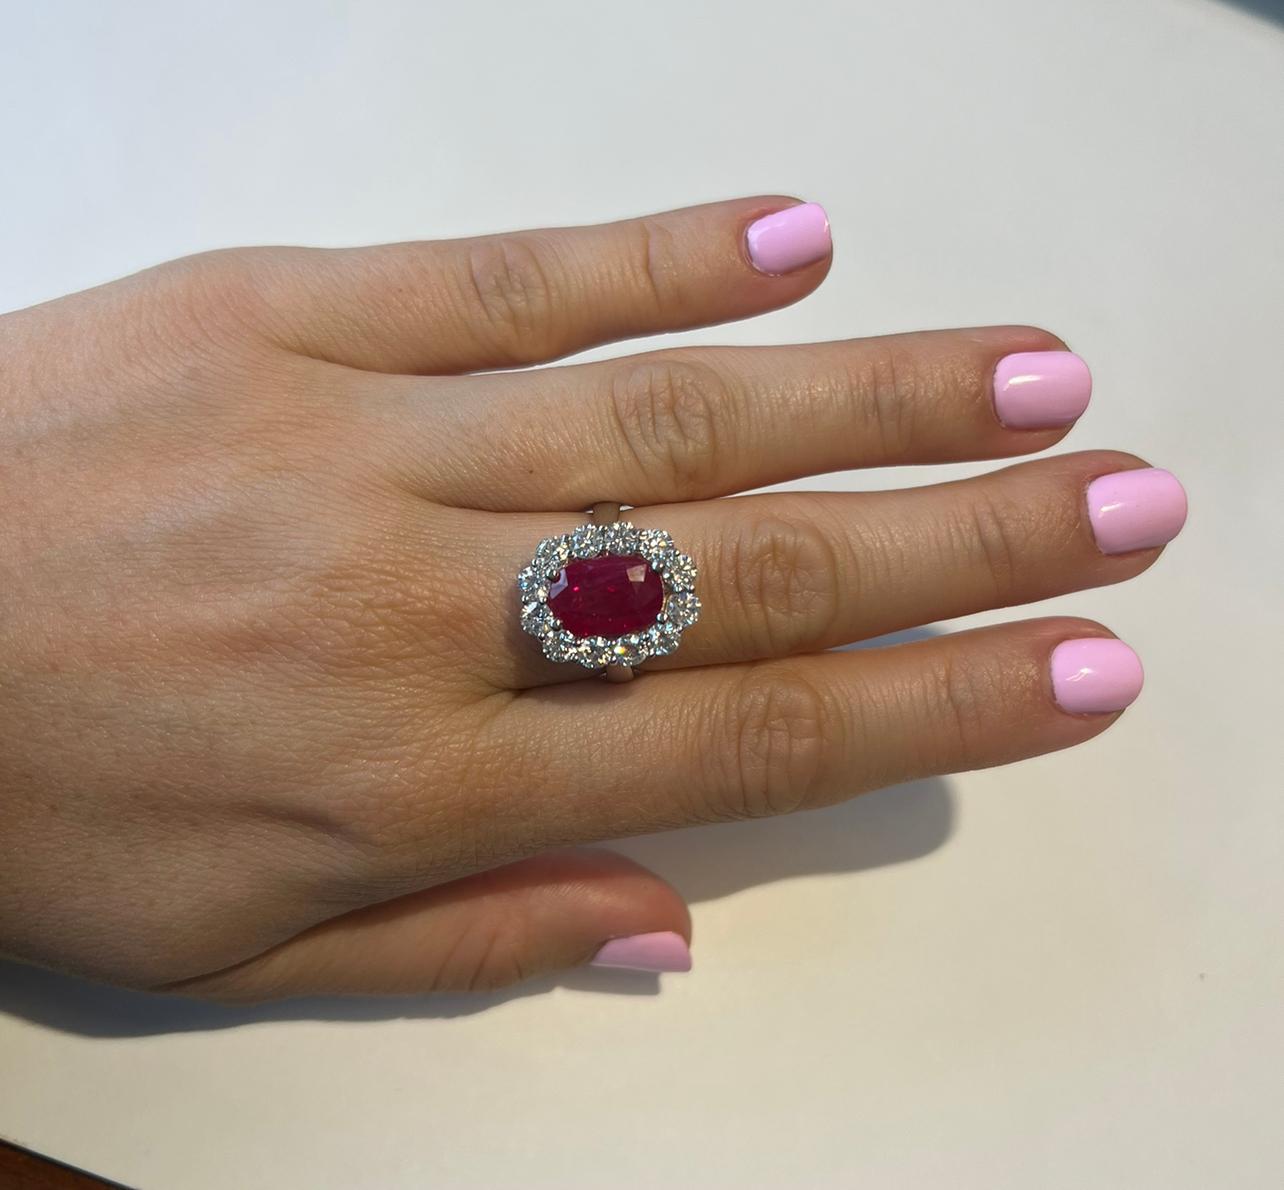 3.49 carat Natural Earth Mined Ruby
Surrounded by 1.80 carats of natural earth mined Diamonds
Ring measures 0.75 inches tall and .50 inches wide
18kt White Gold
Made in the USA in Miami, FL


Experience the allure of our exquisite 3.49 carat Natural